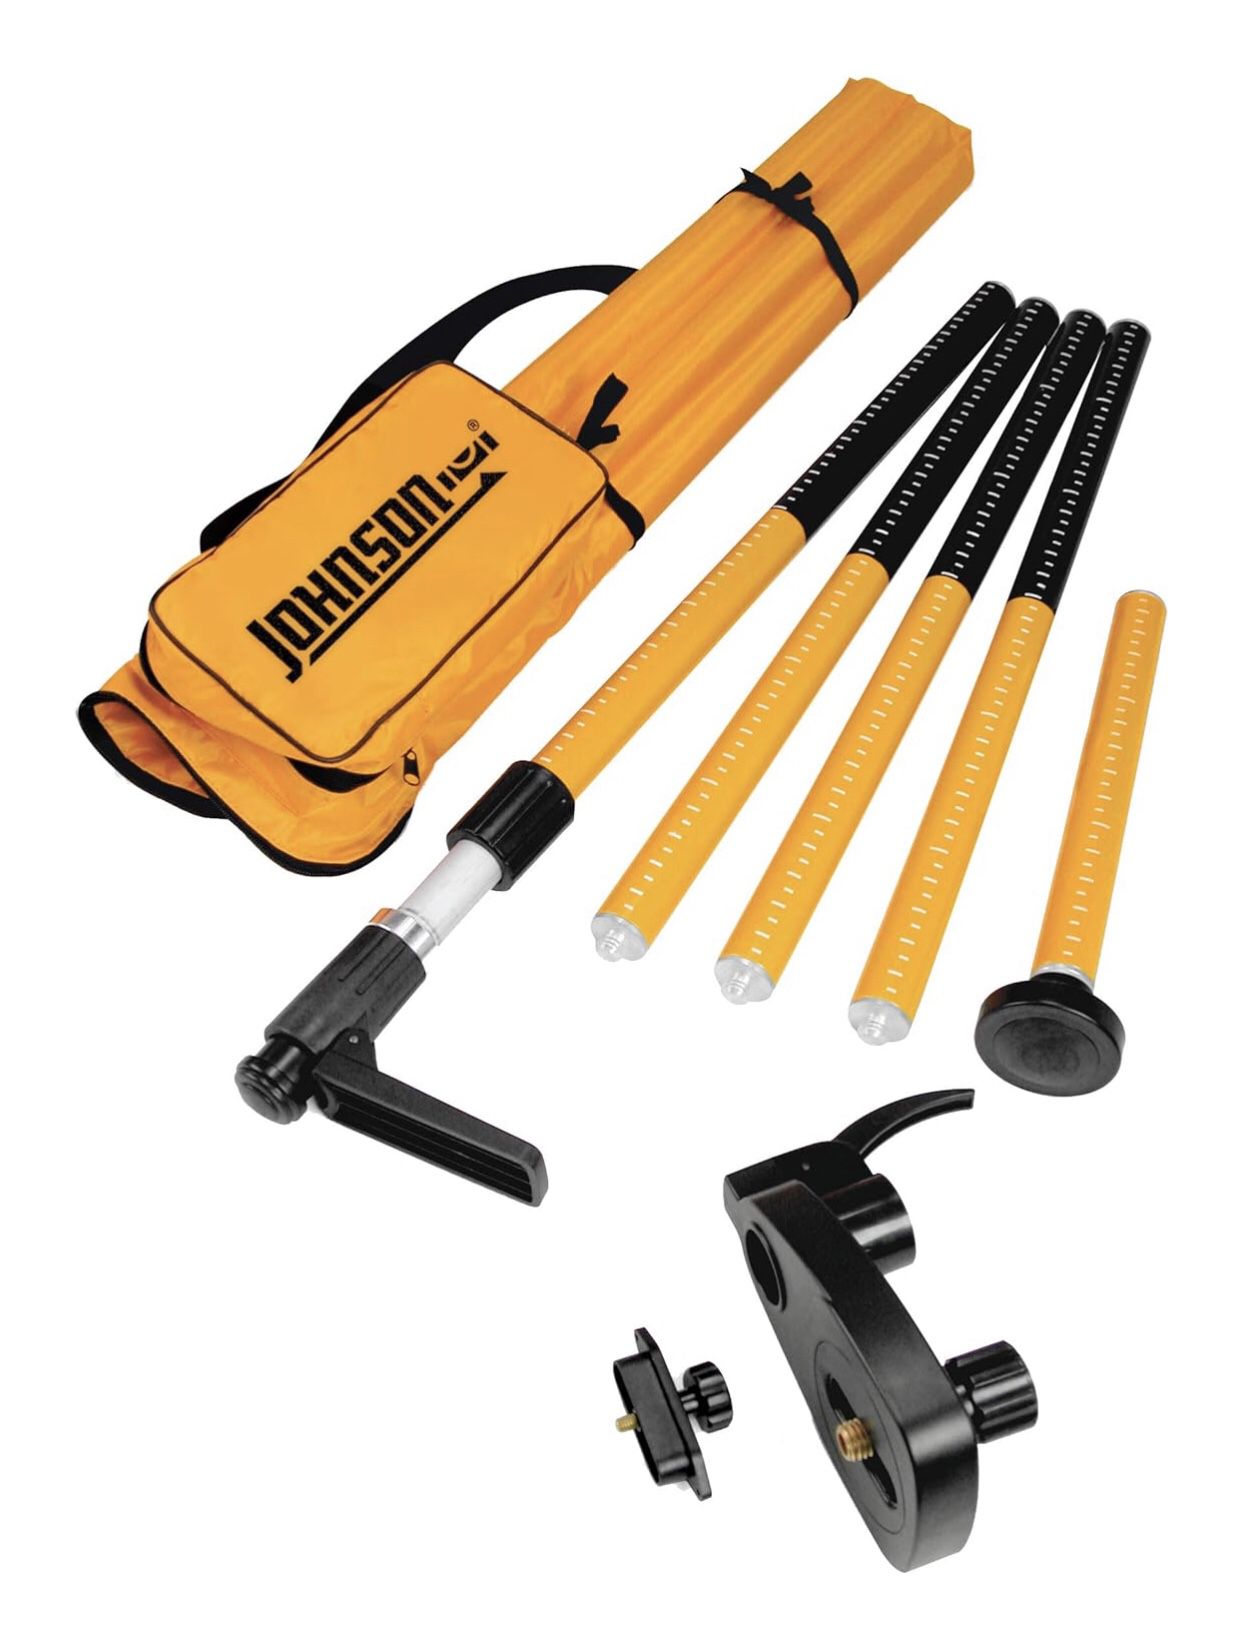 NEW! Johnson Level & Tool Interior Laser Pole with 5/8" - 11 or 1/4" Thread, 2'4"-11' Working Height